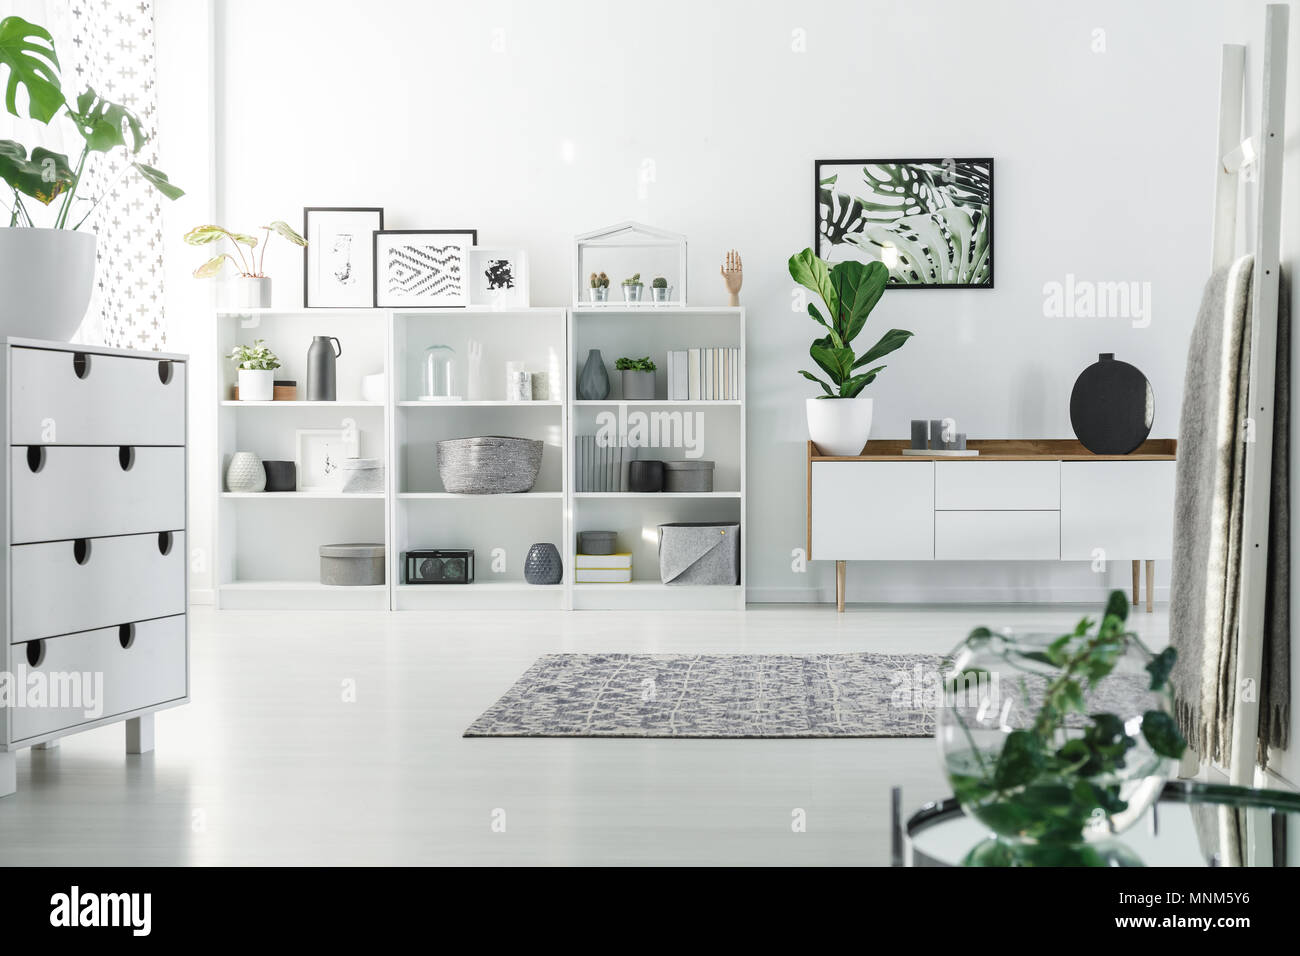 Bright room interior with shelves, plants, cupboard and decorations Stock Photo